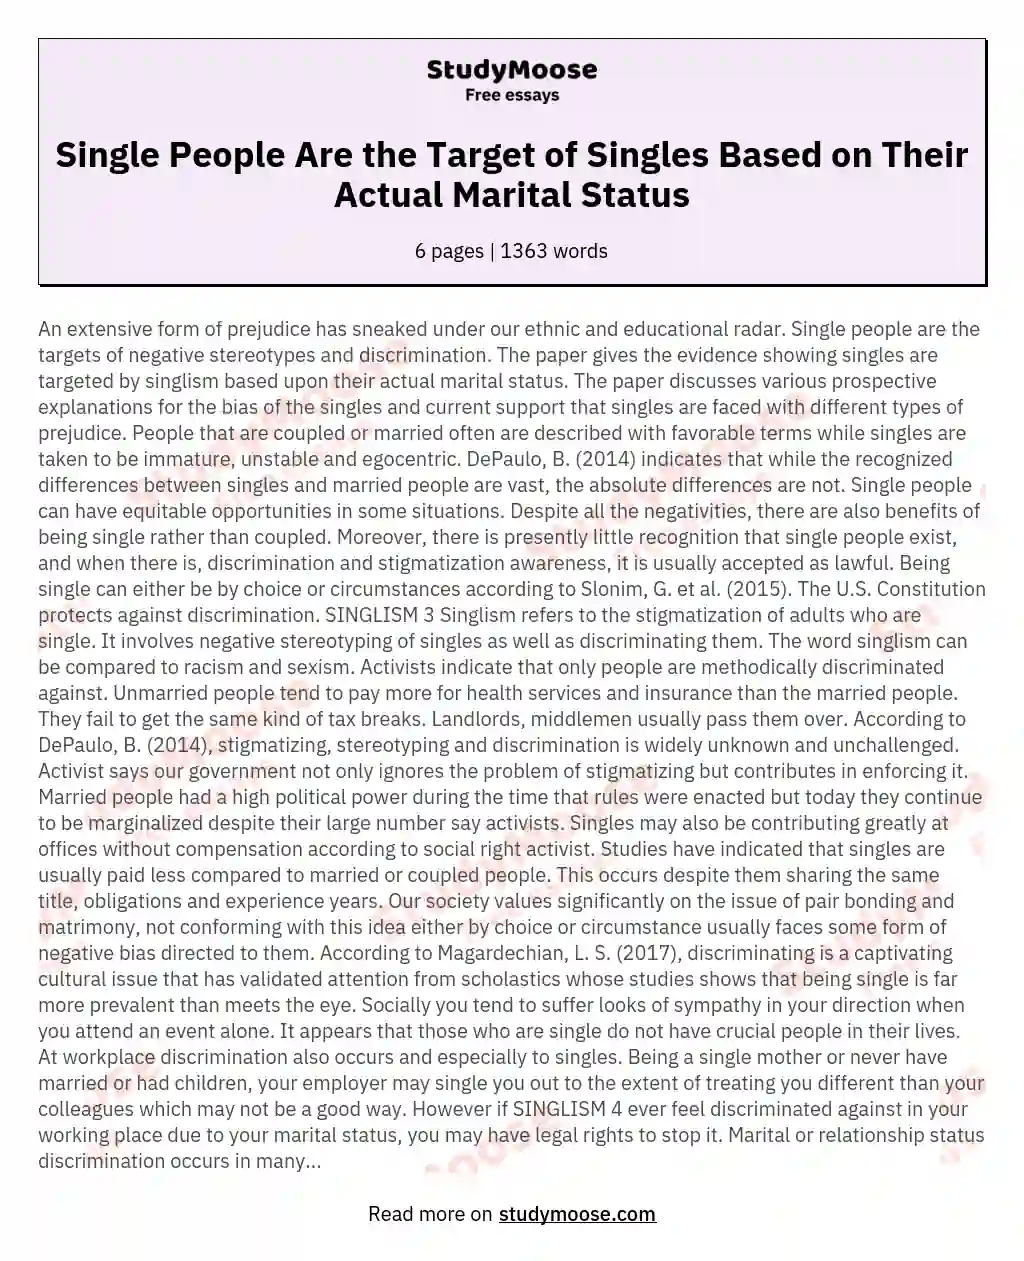 Single People Are the Target of Singles Based on Their Actual Marital Status essay